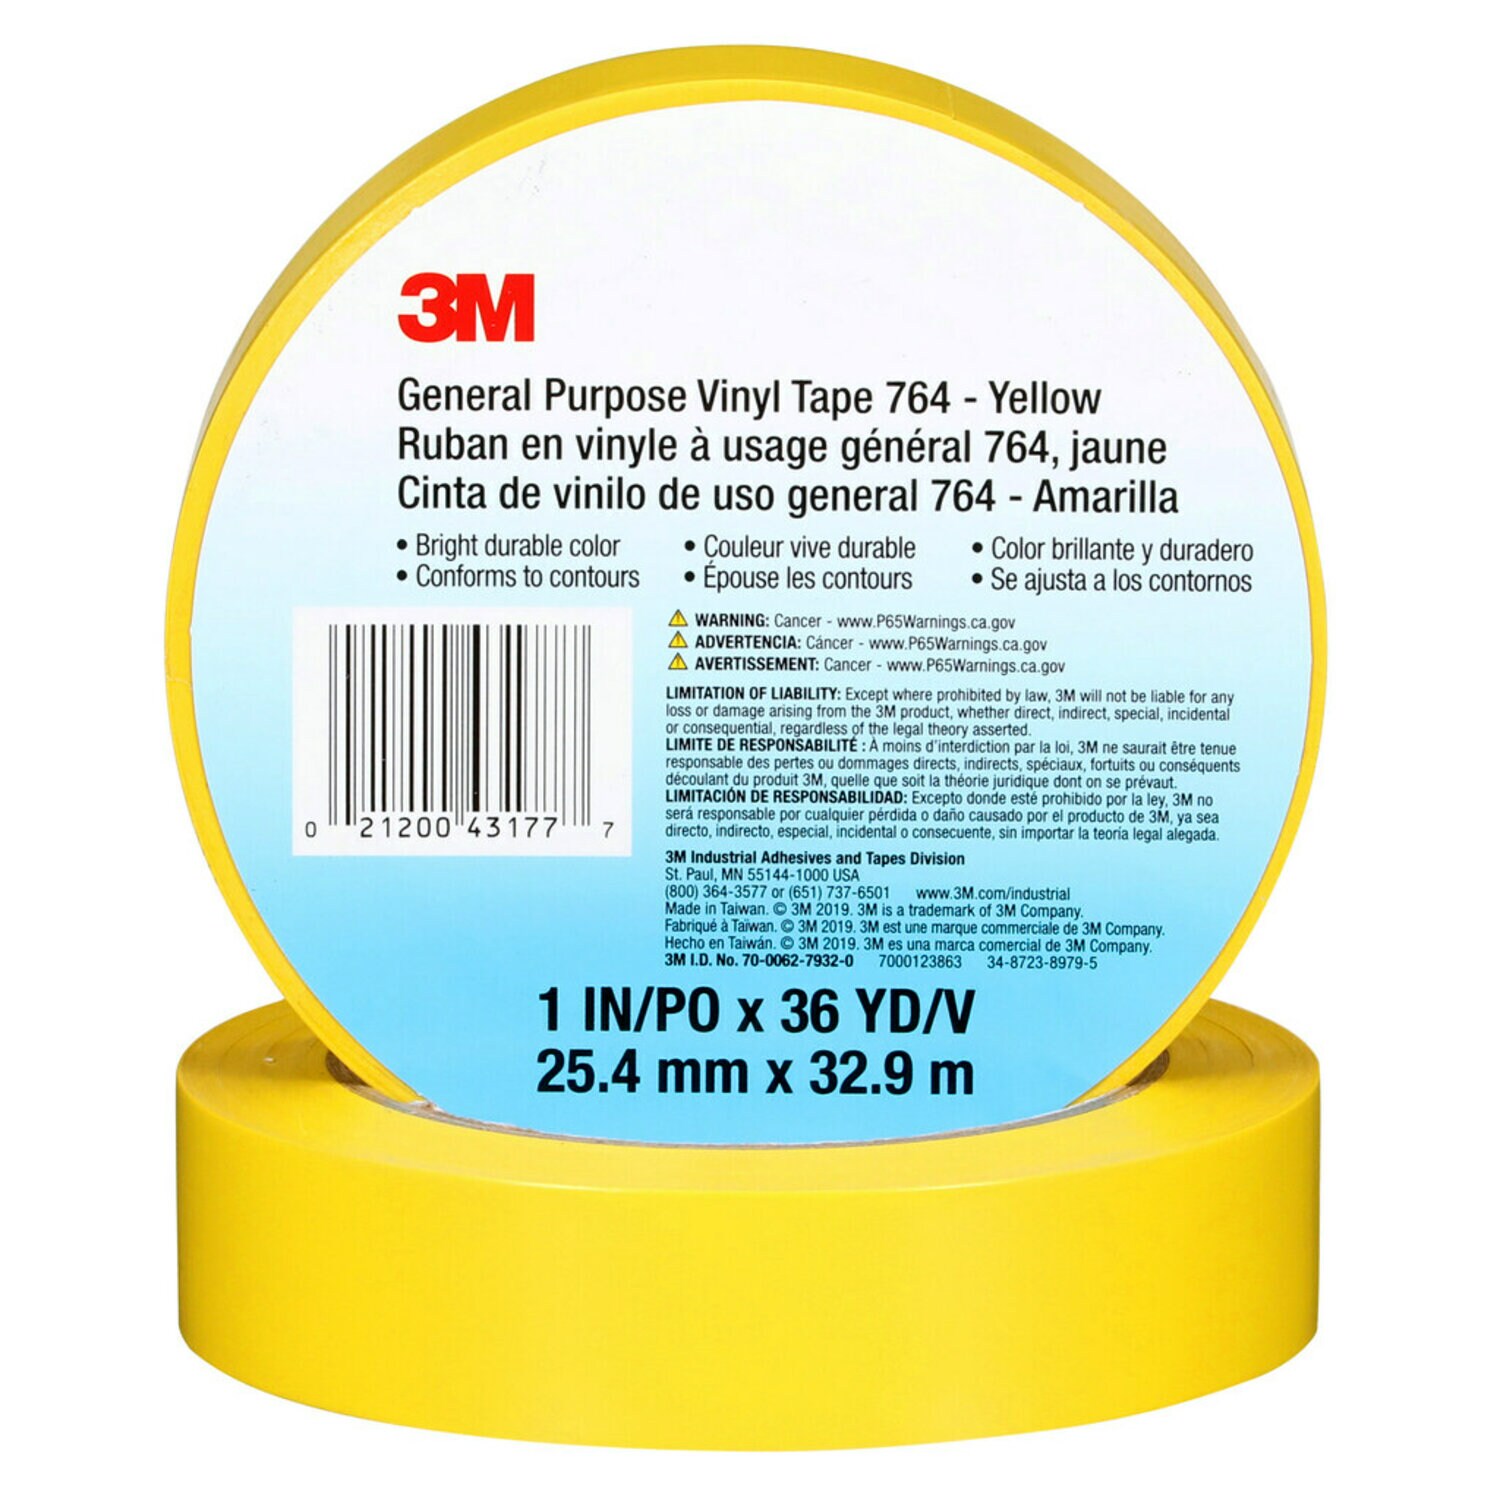 7000123863 - 3M General Purpose Vinyl Tape 764, Yellow, 1 in x 36 yd, 5 mil, 36 Roll/Case, Individually Wrapped Conveniently Packaged